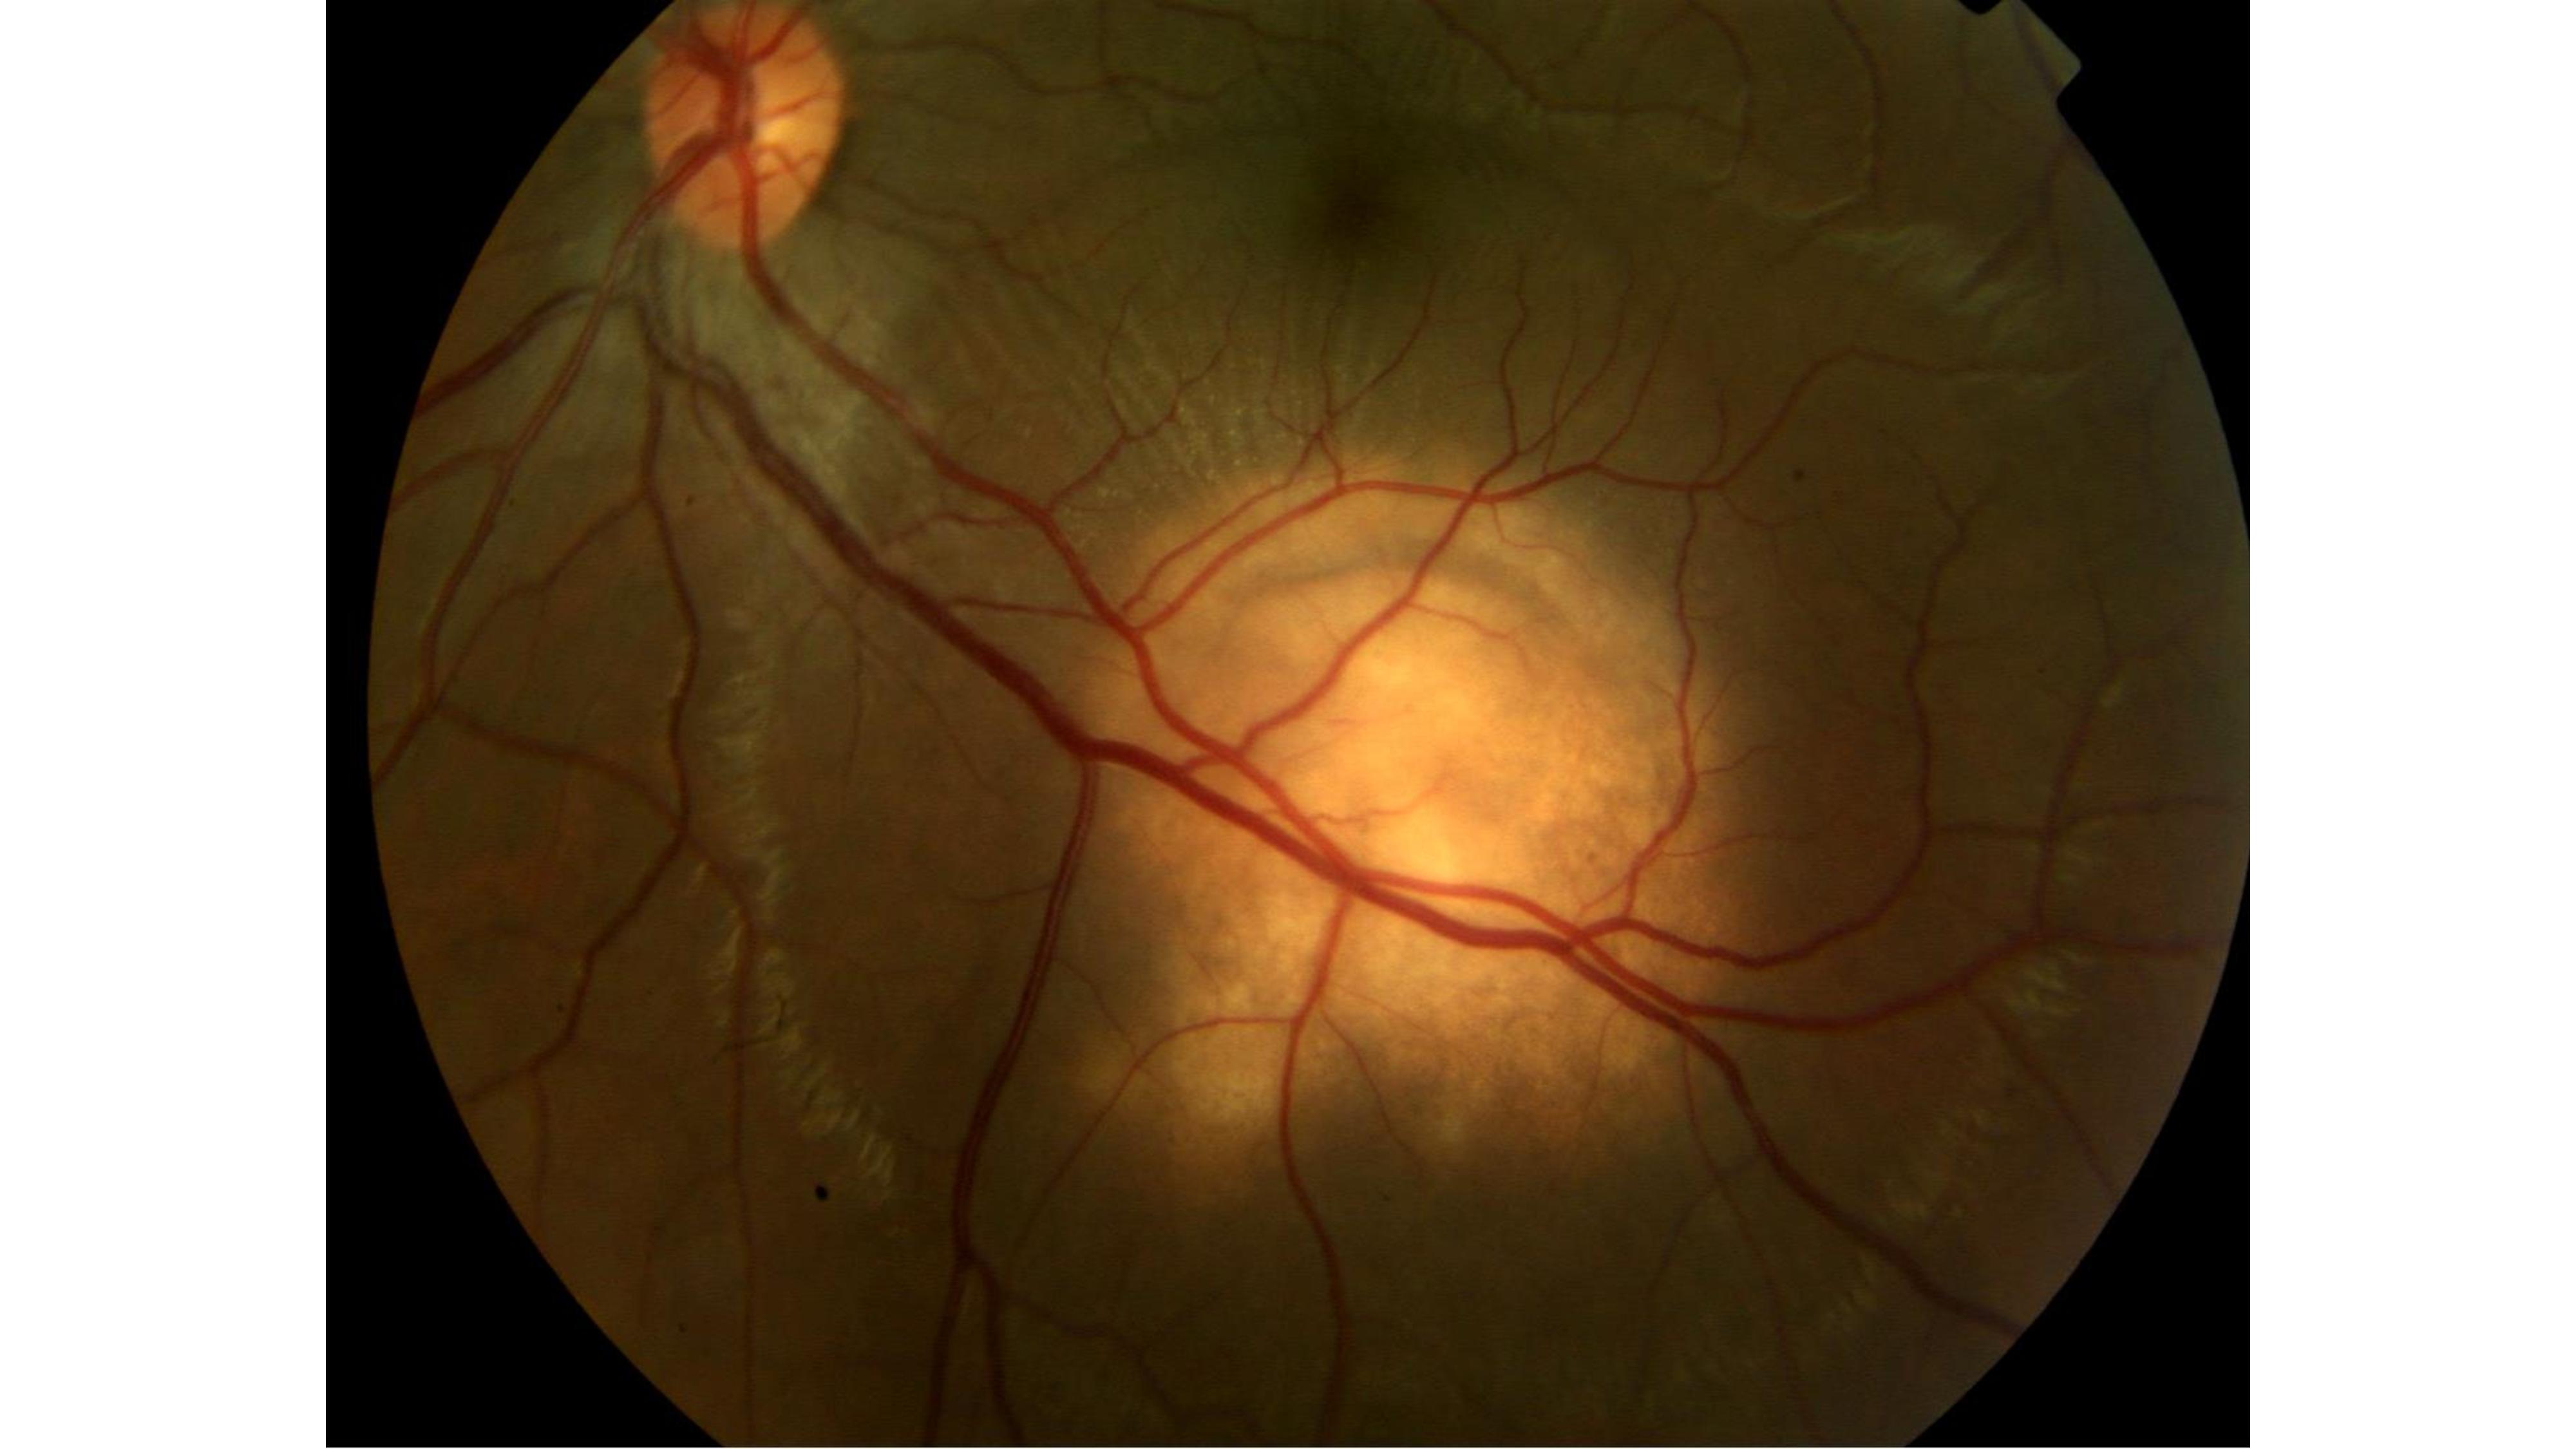 Large choroidal granuloma with subretinal fluid reaching the macula in a patient with TB choroiditis.